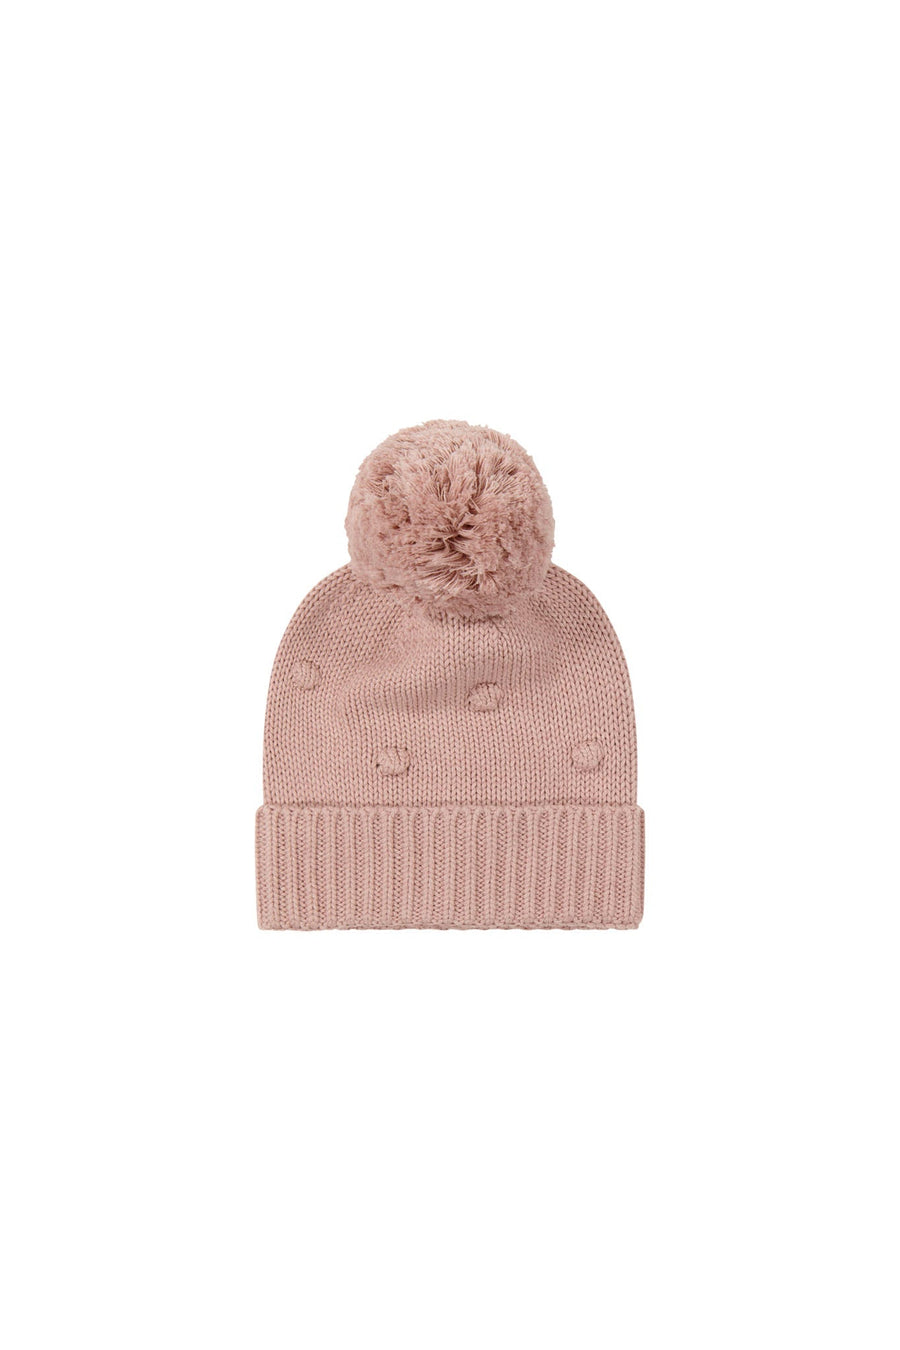 Alice Knitted Hat - Powder Pink Marle Childrens Hat from Jamie Kay NZ